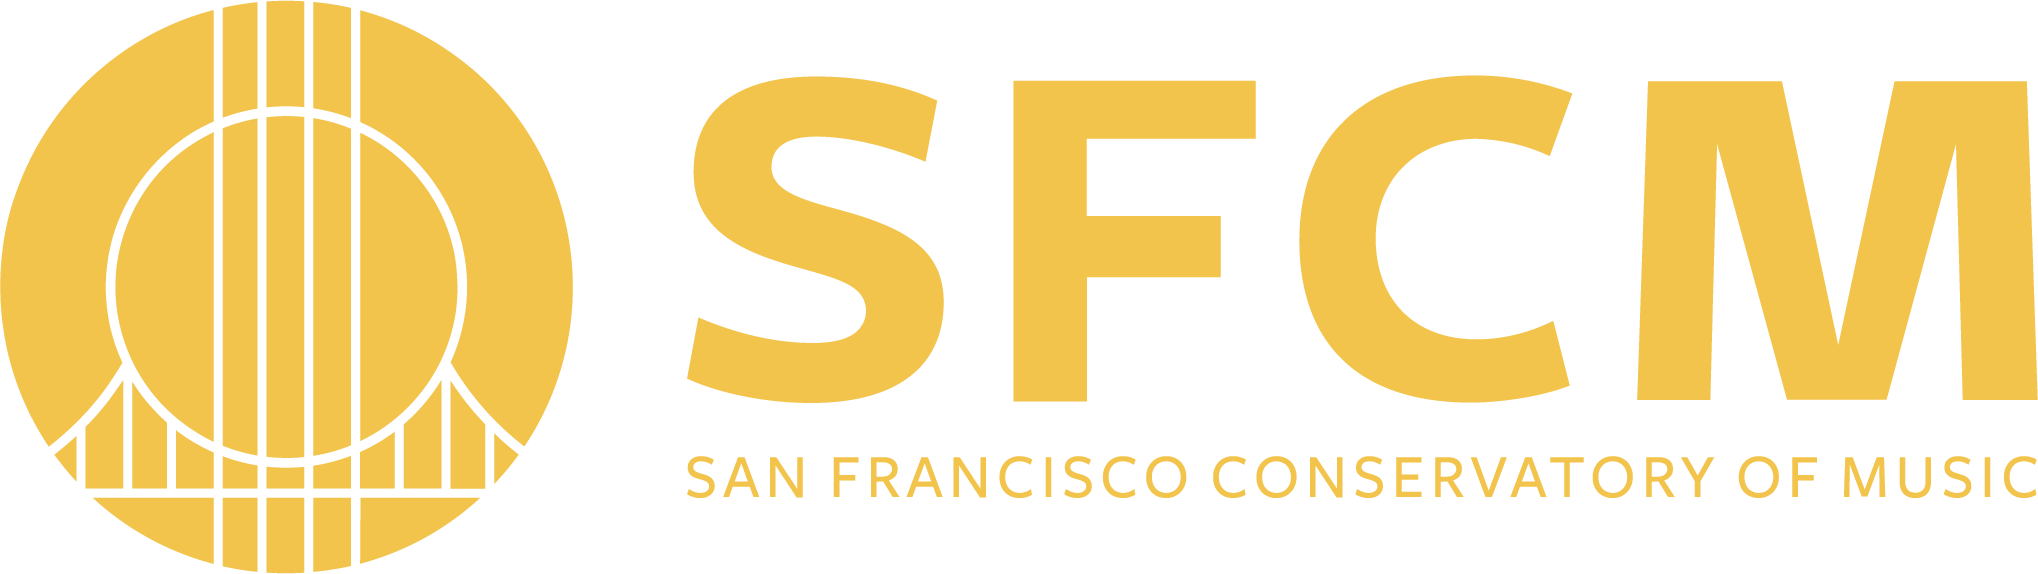 San-Francisco-Conservatory-of-Music-logo.png